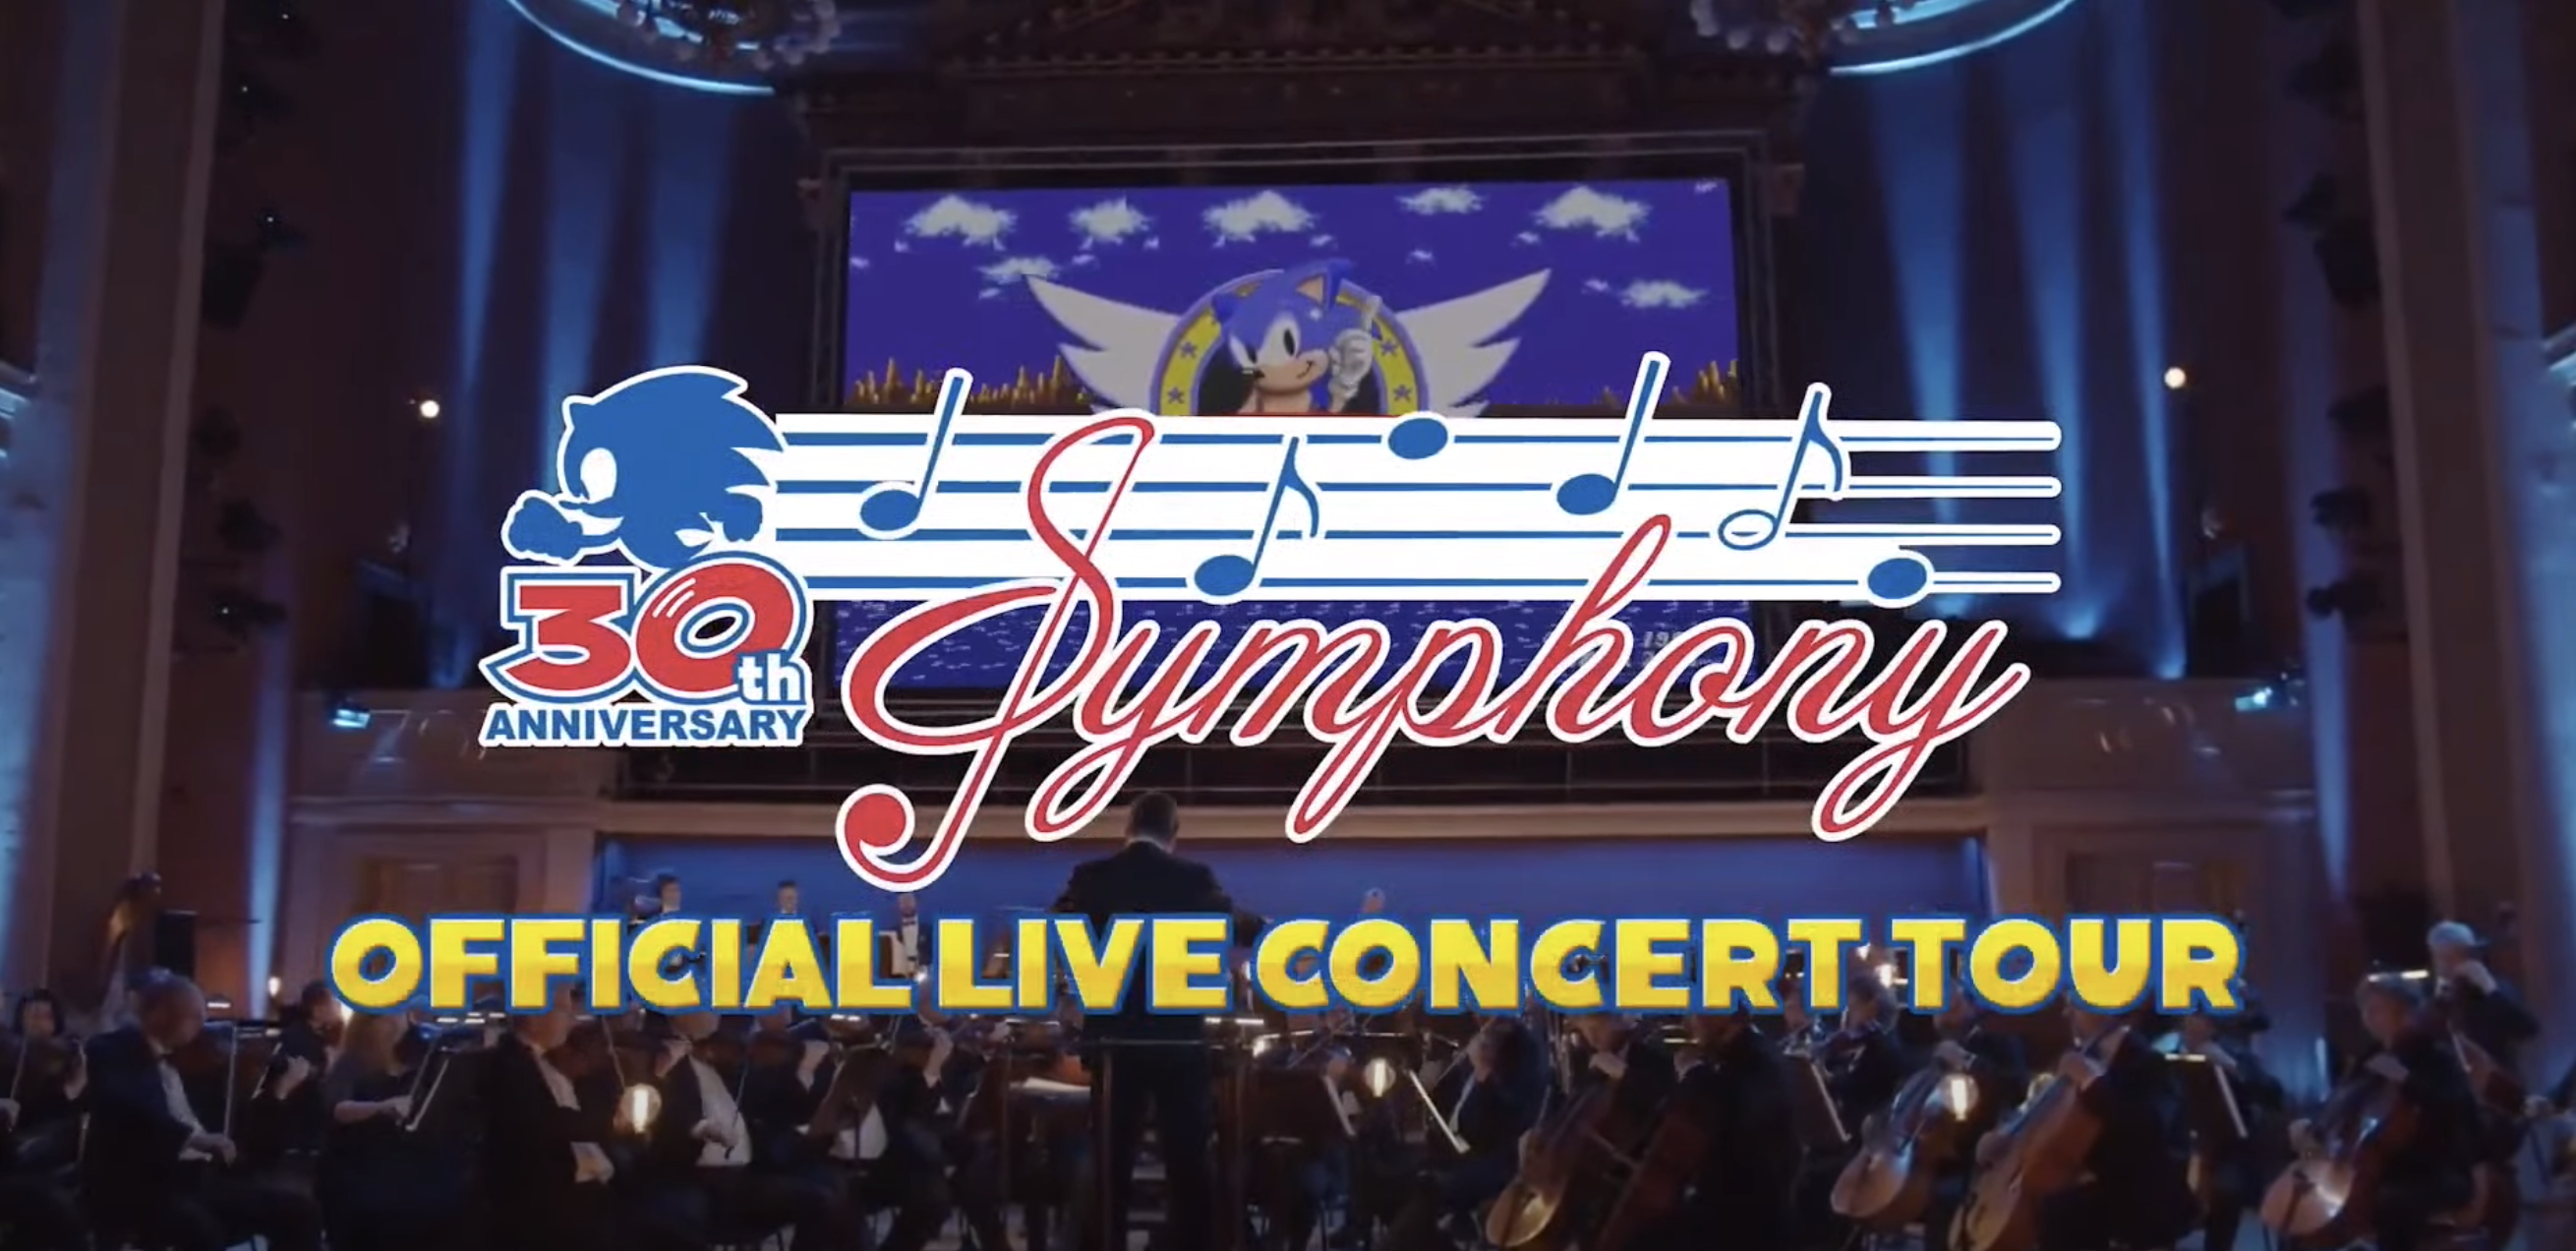 Sonic Symphony Tickets, Event Dates & Schedule